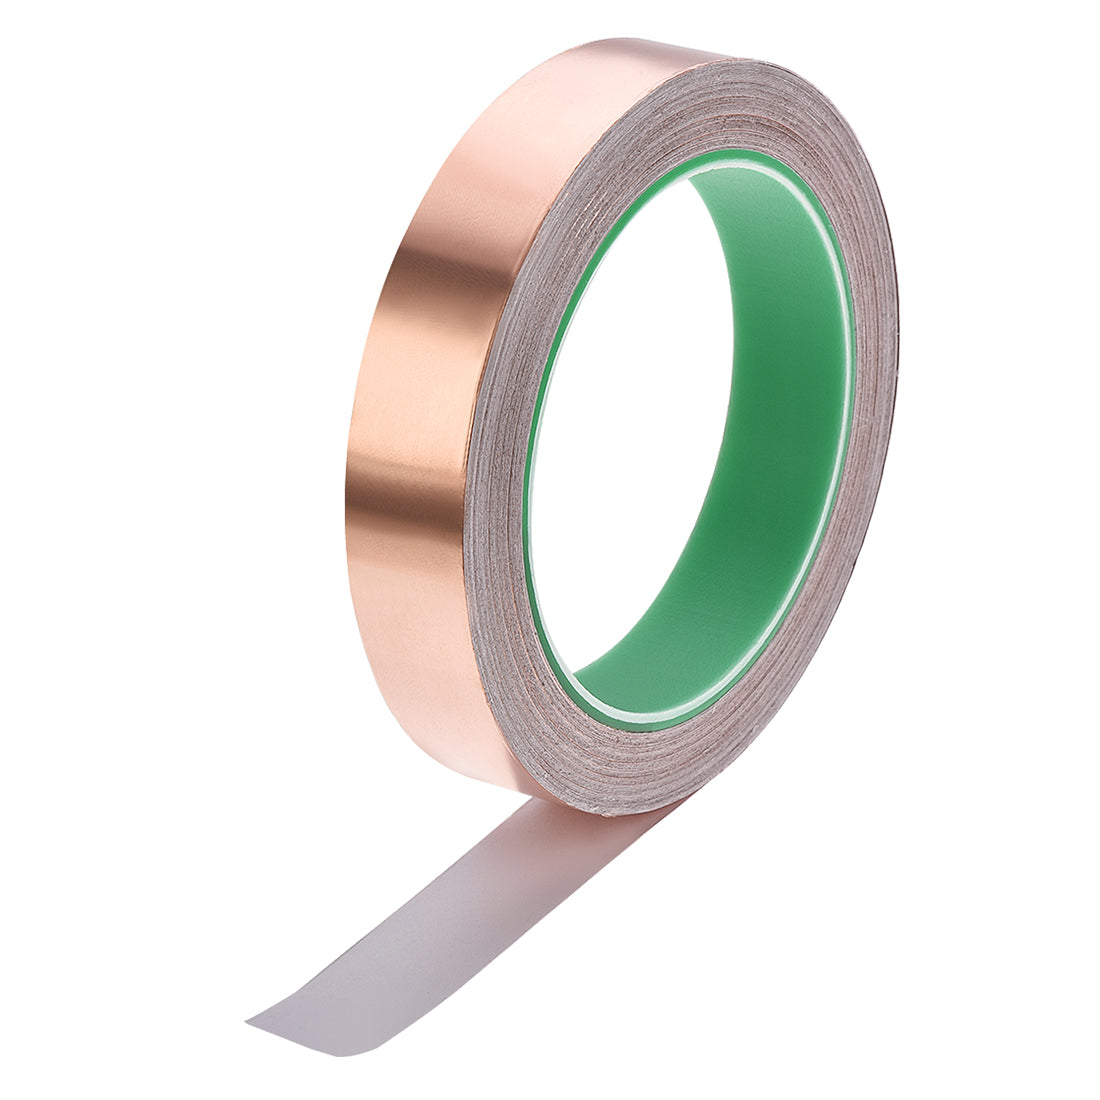 uxcell Uxcell Double Sided Conductive Tape Copper Foil Tape 20mm x 20m for EMI Shielding